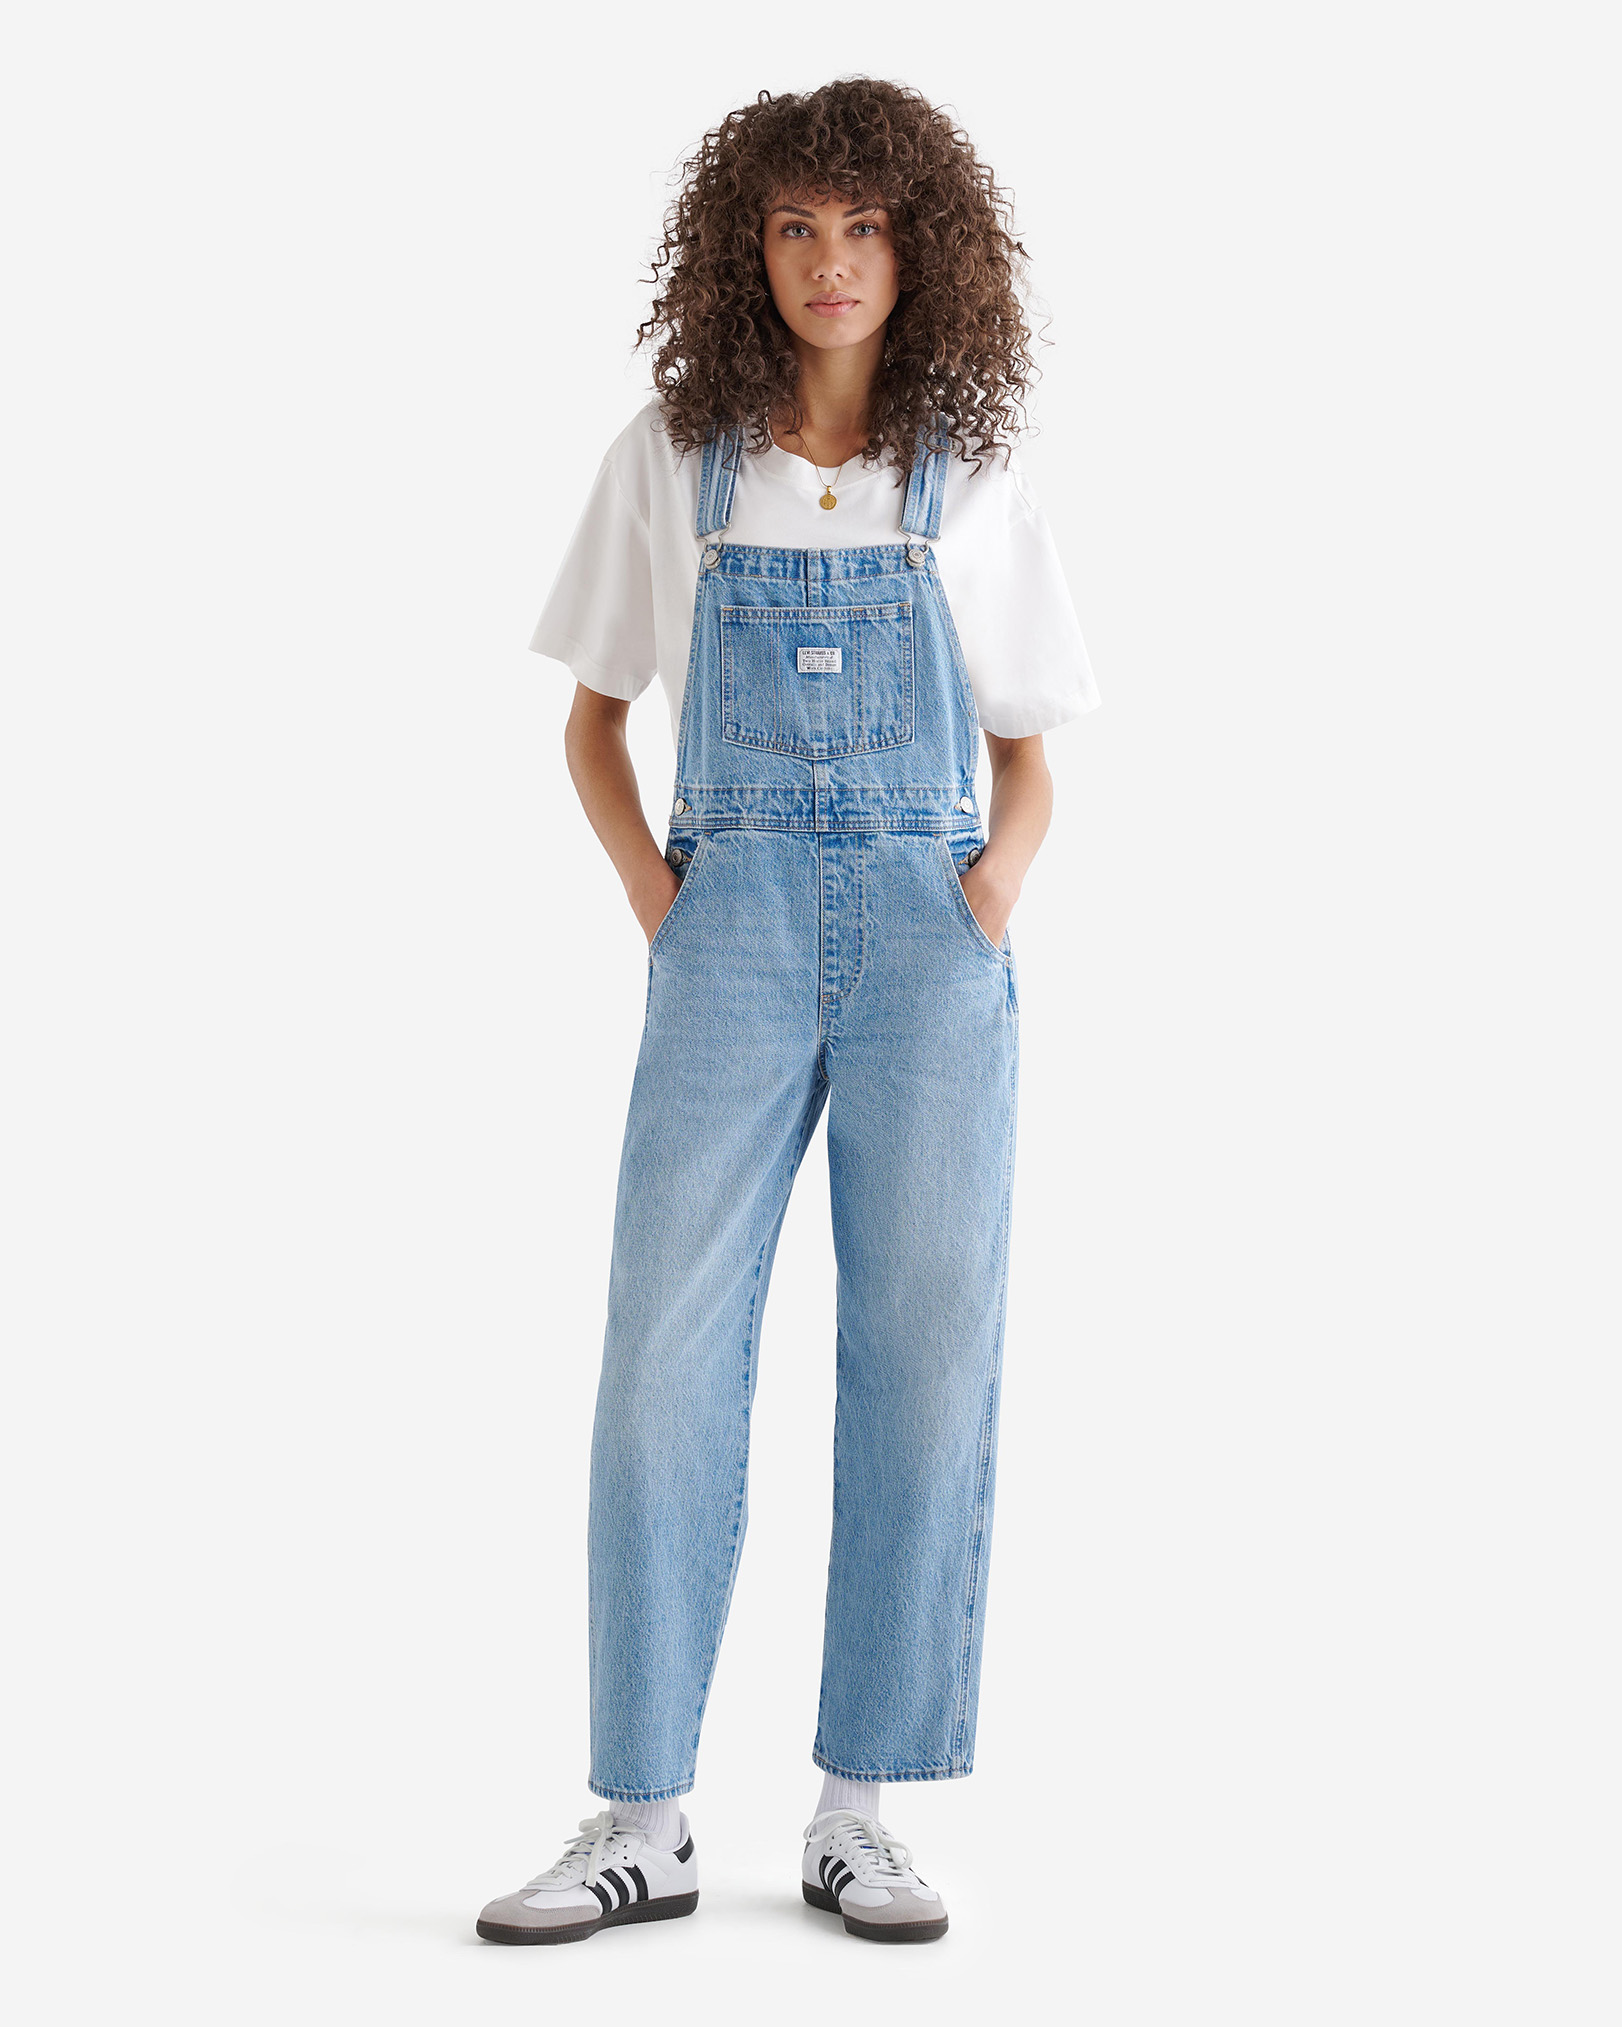 Roots Levi's Vintage Overall in Light Denim